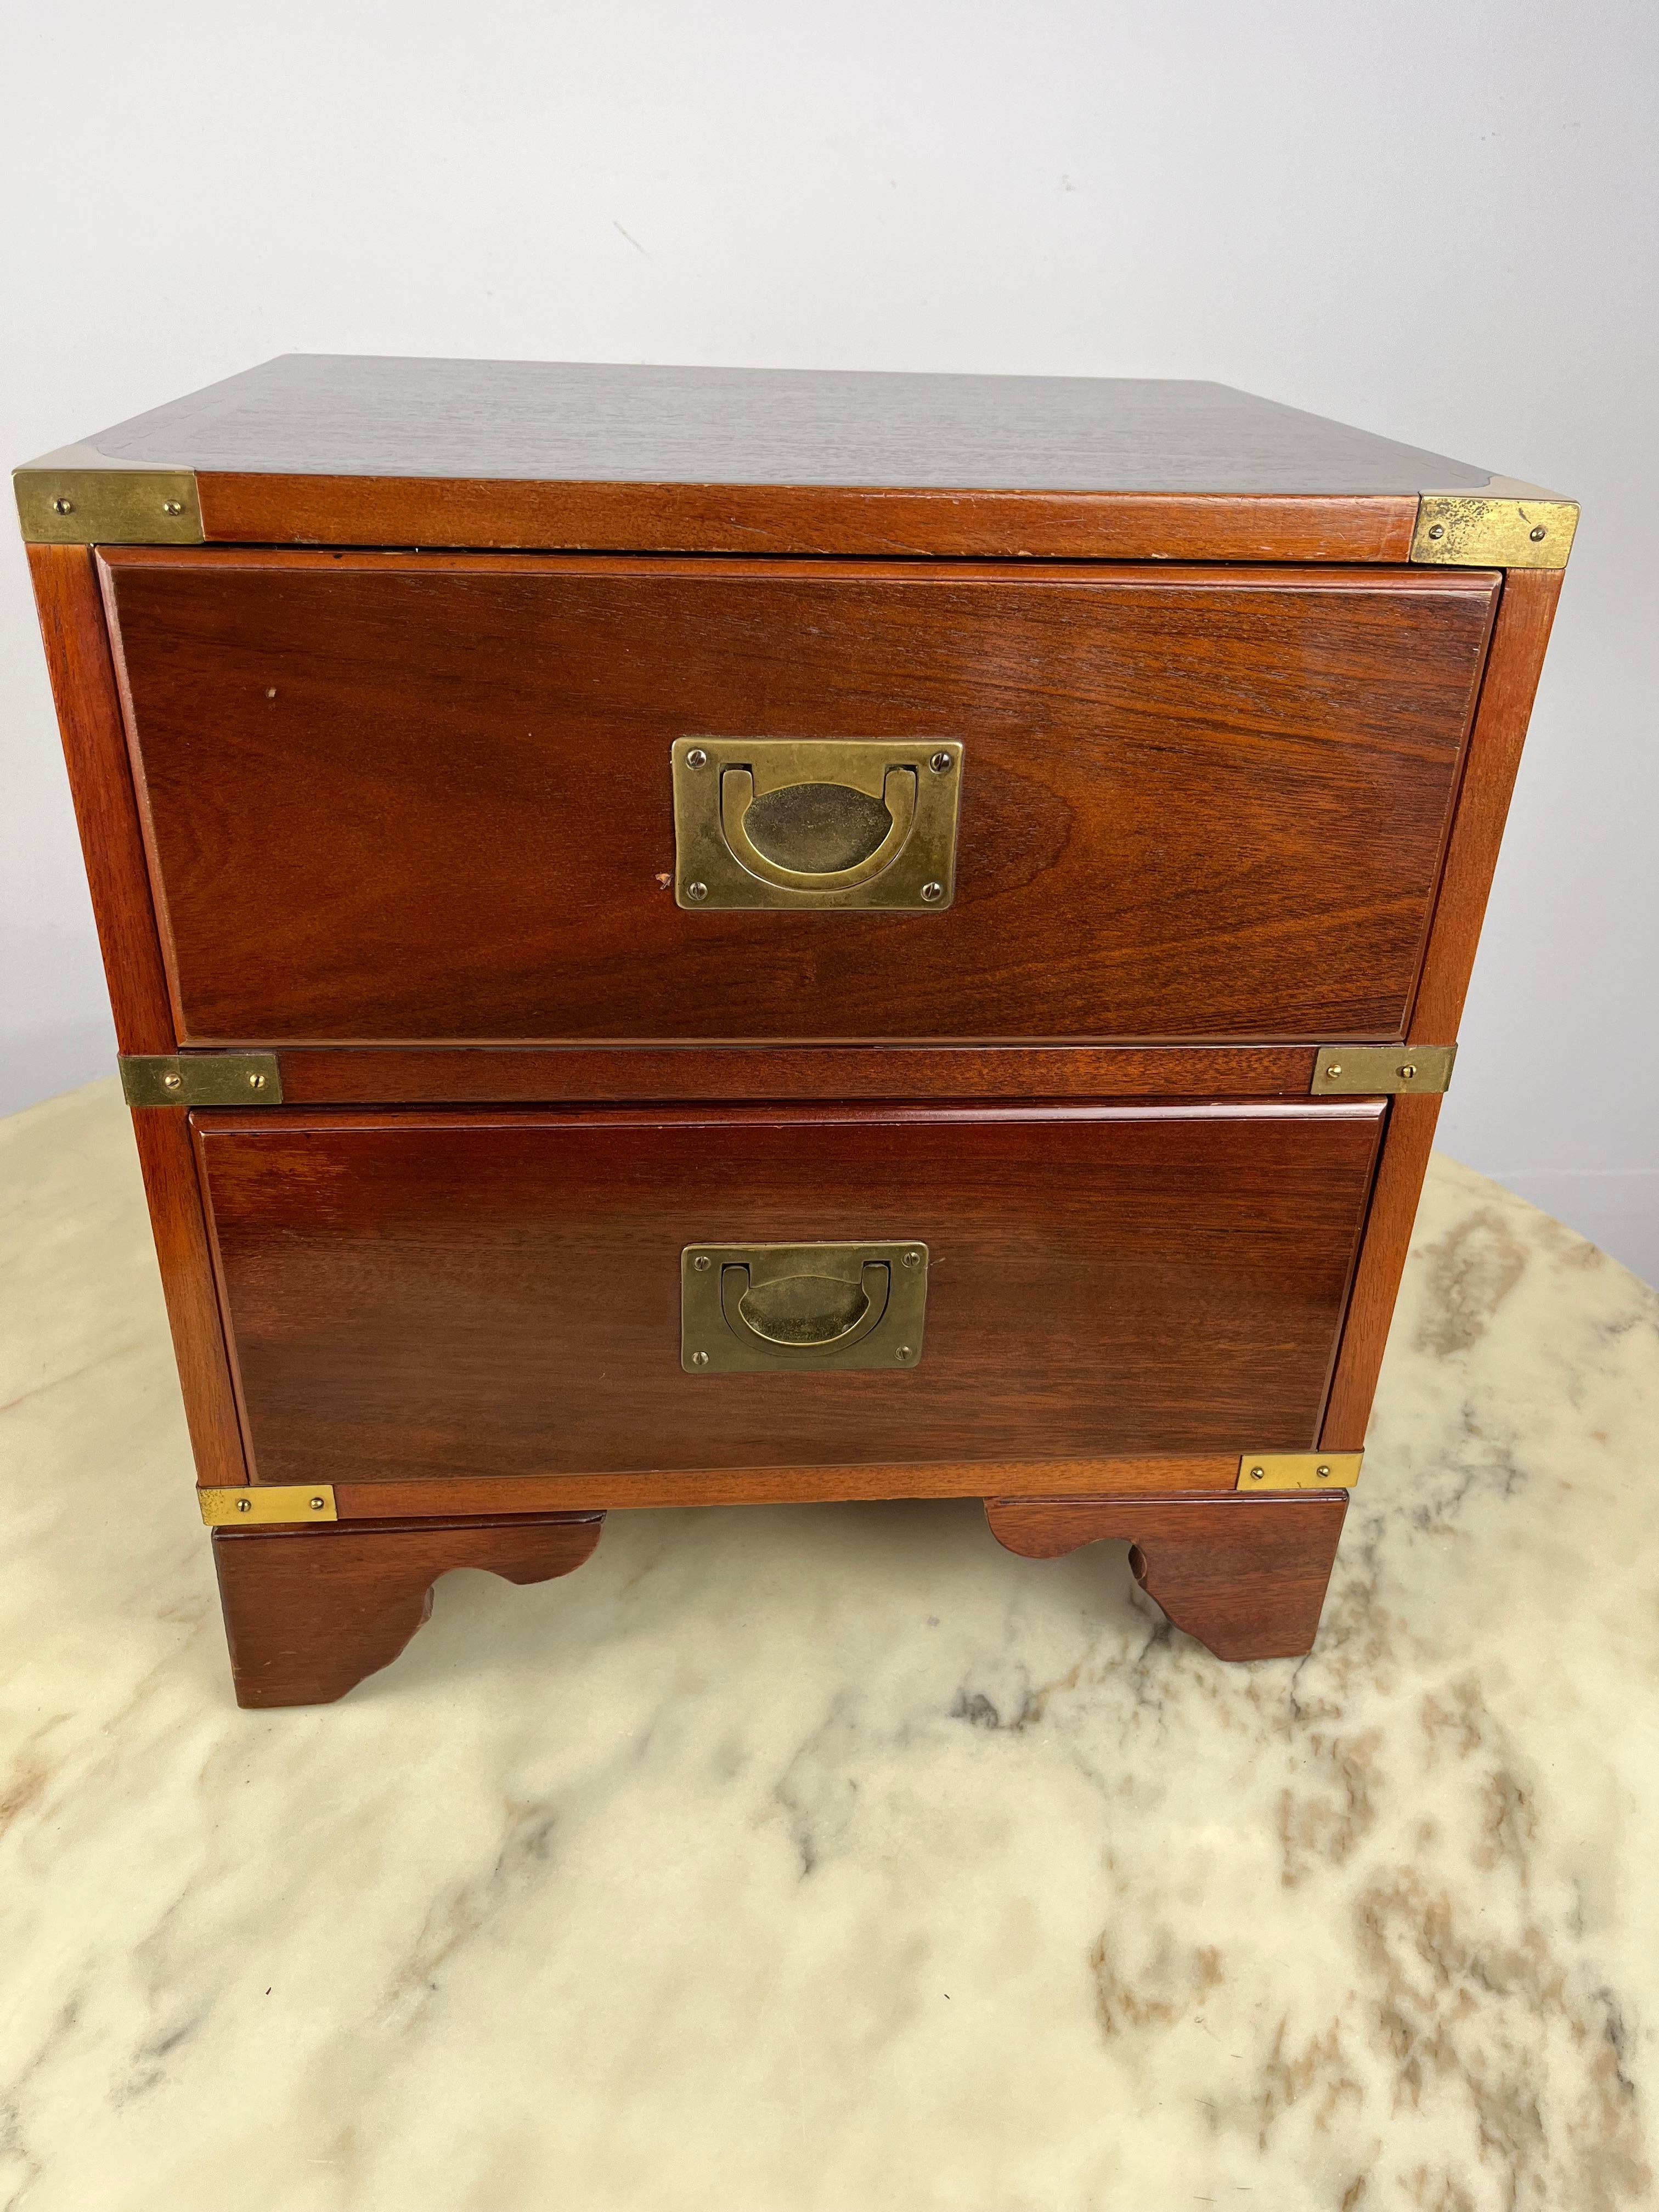 British Officer's Bedside Table by Reh Kennedy for Harrods London 1980s For Sale